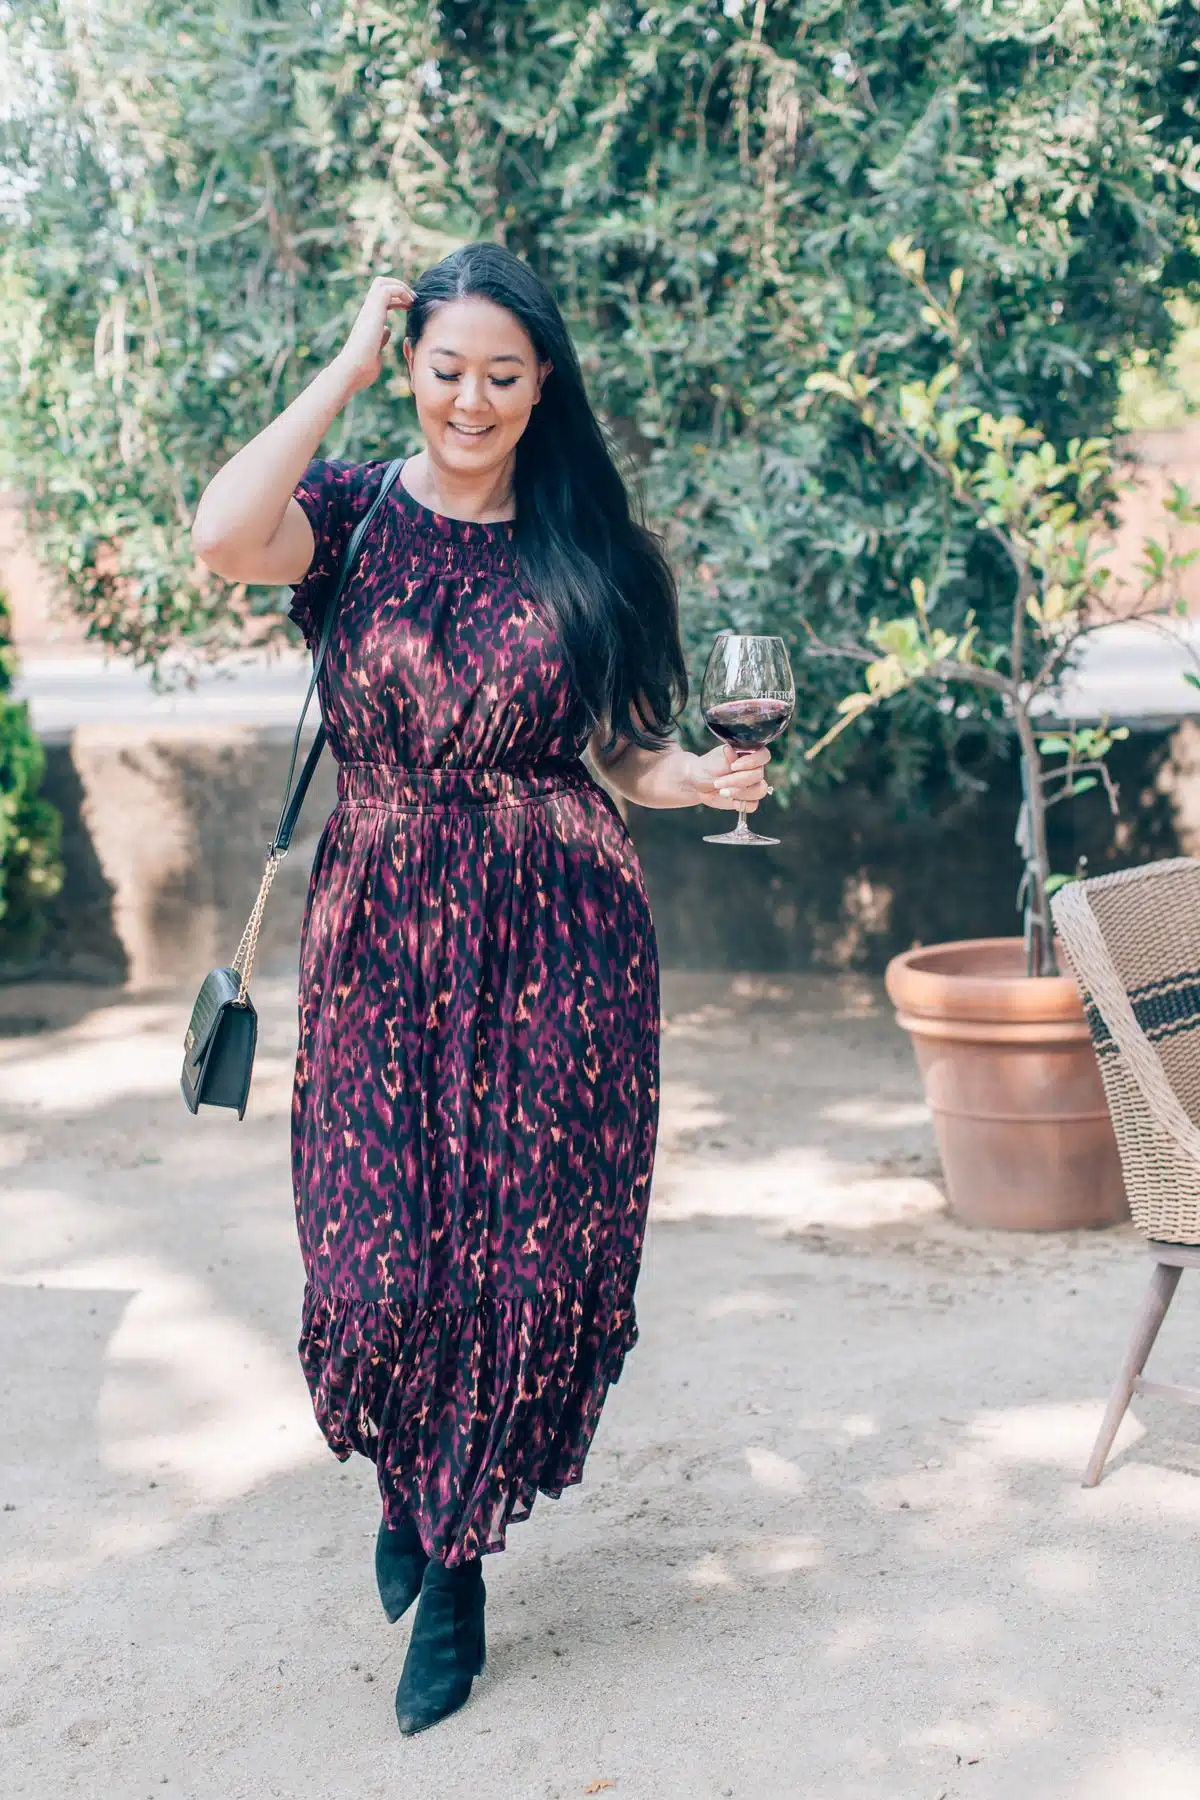 Napa wine tasting dress, by travel blogger What The Fab